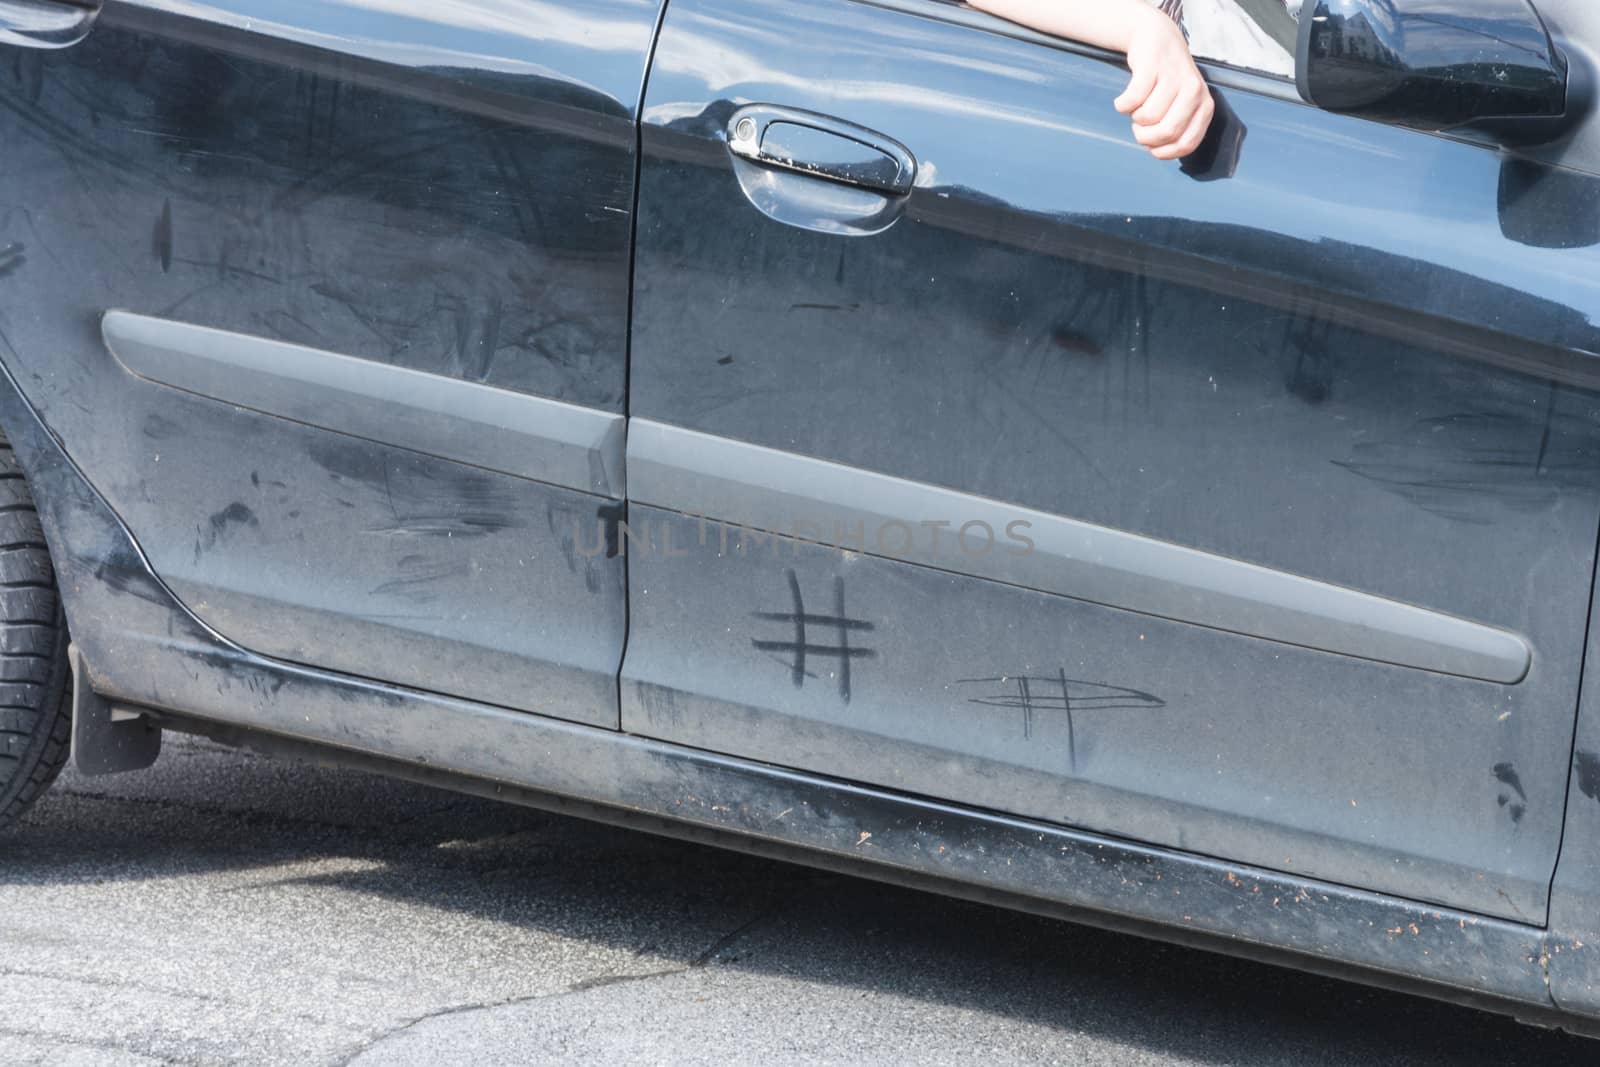 Contaminated car door with hashtag sign    by JFsPic